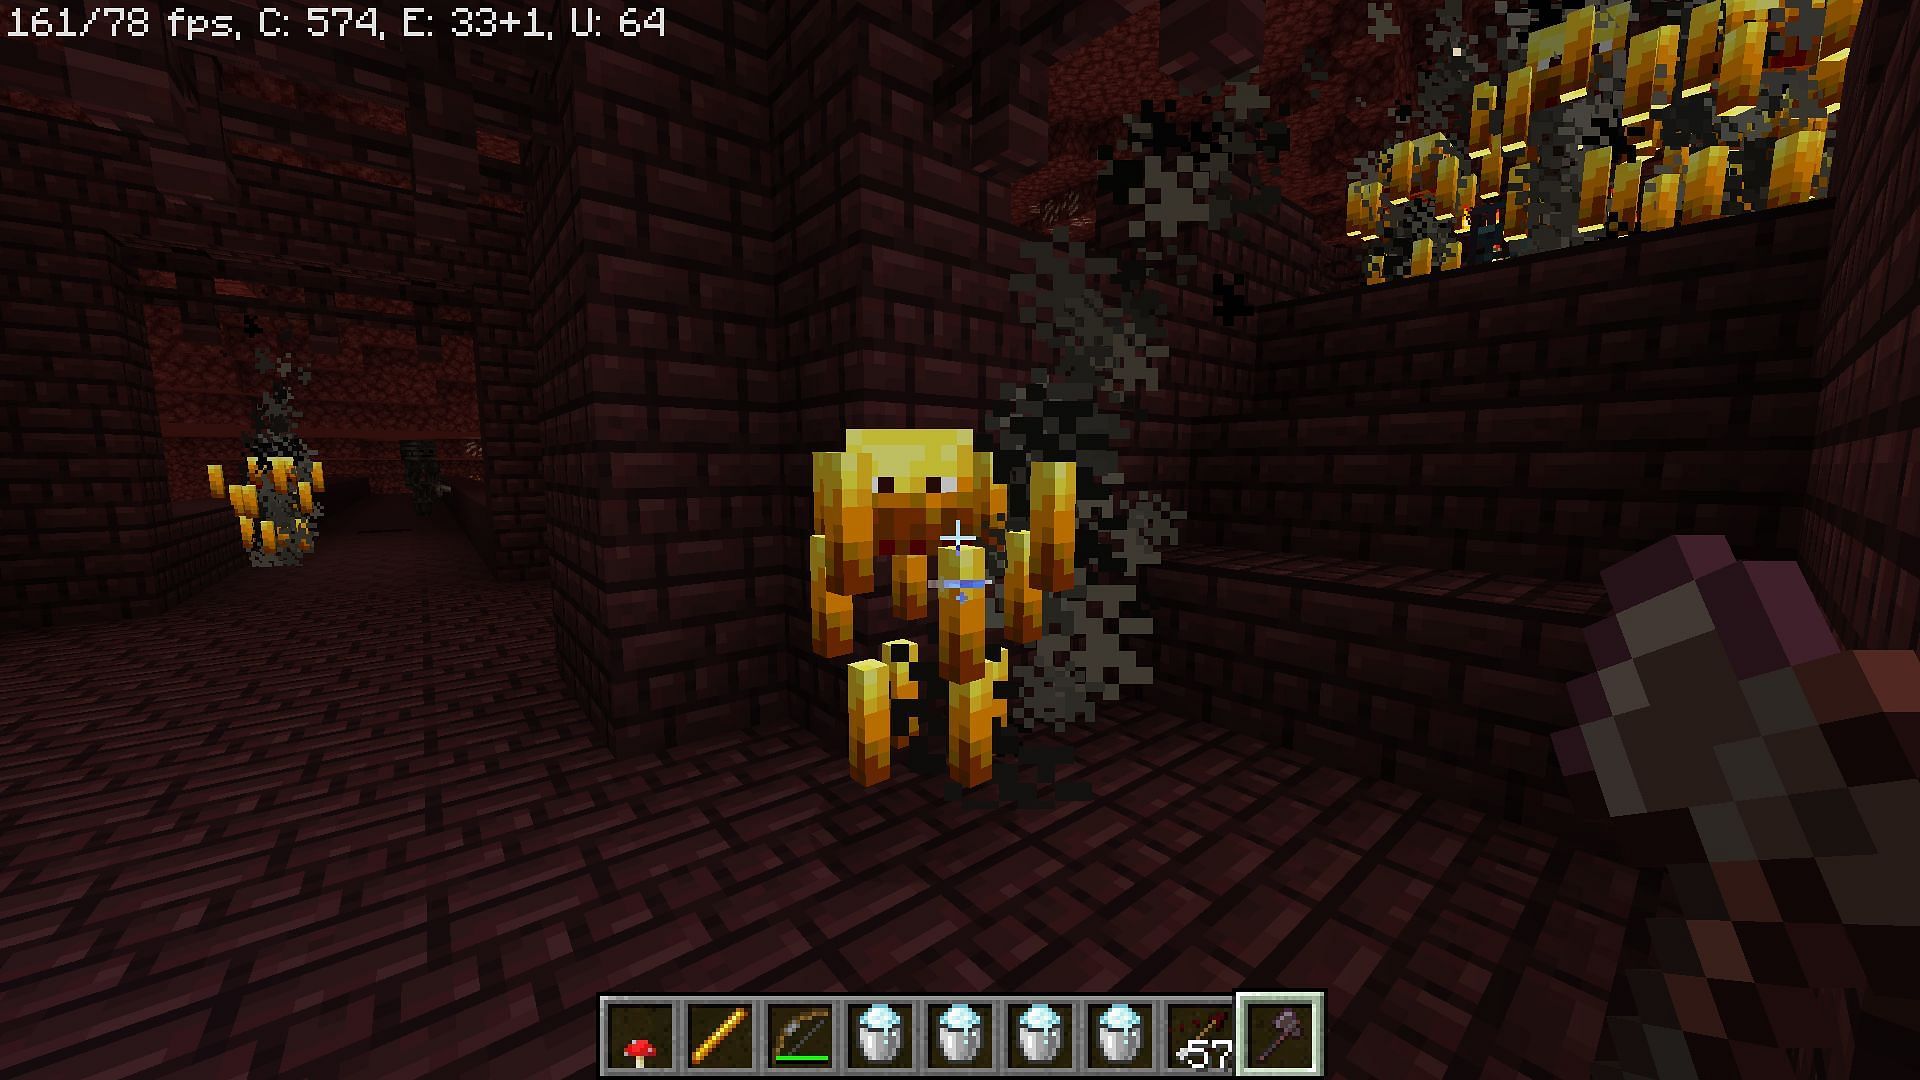 Attacking them with an axe (Image via Minecraft)